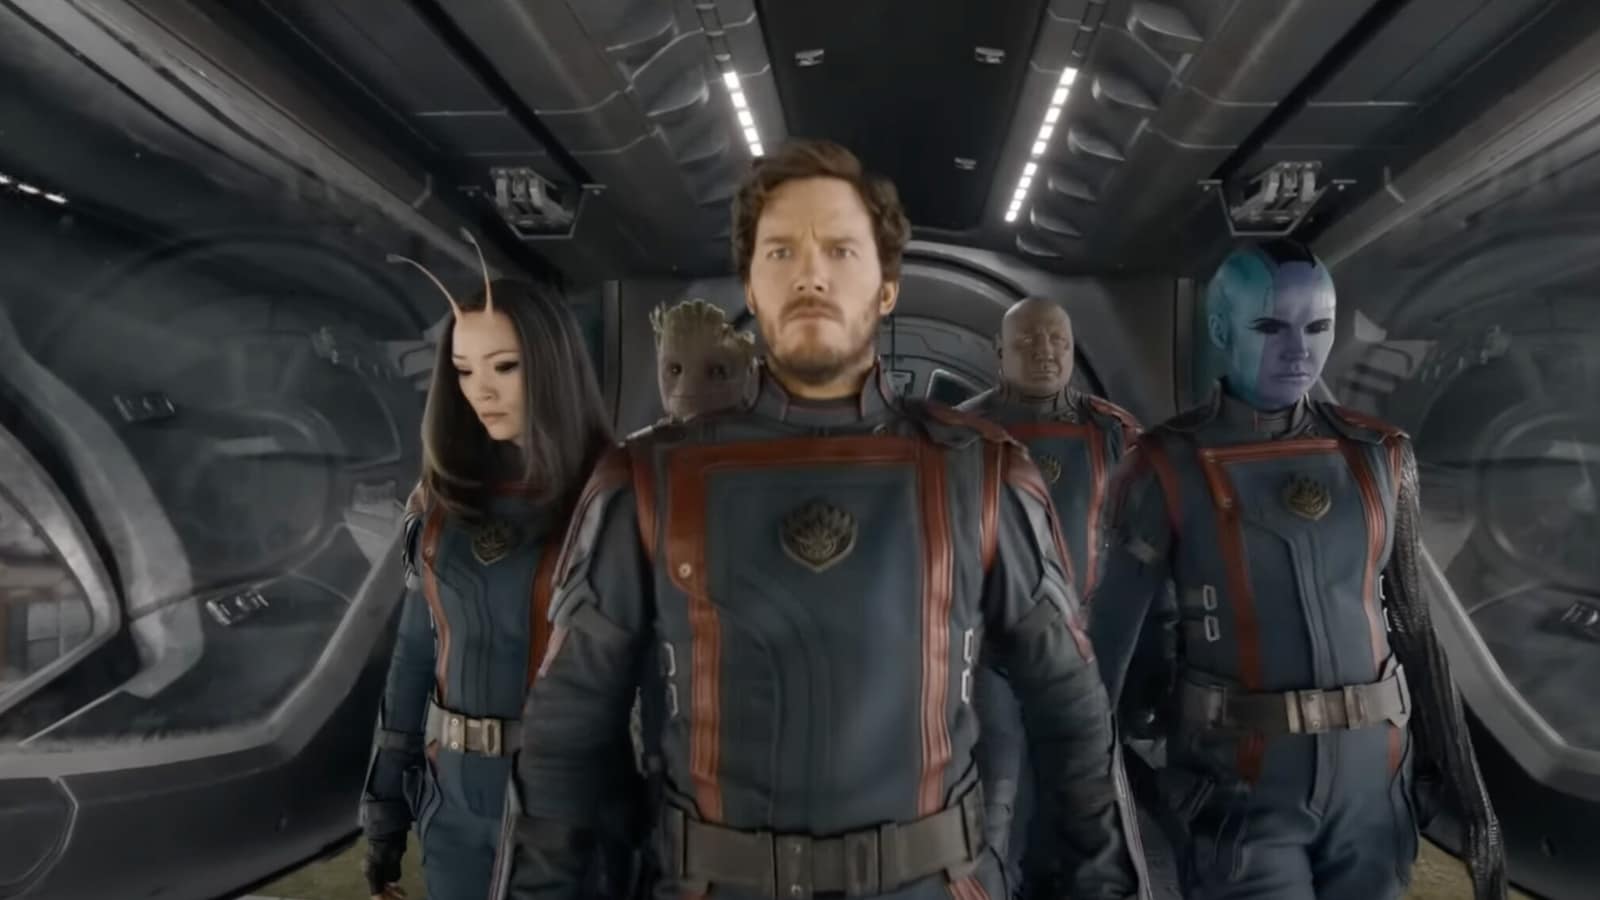 Guardians of the Galaxy Vol. 3 trailer out, fans say 'this movie will be epic'